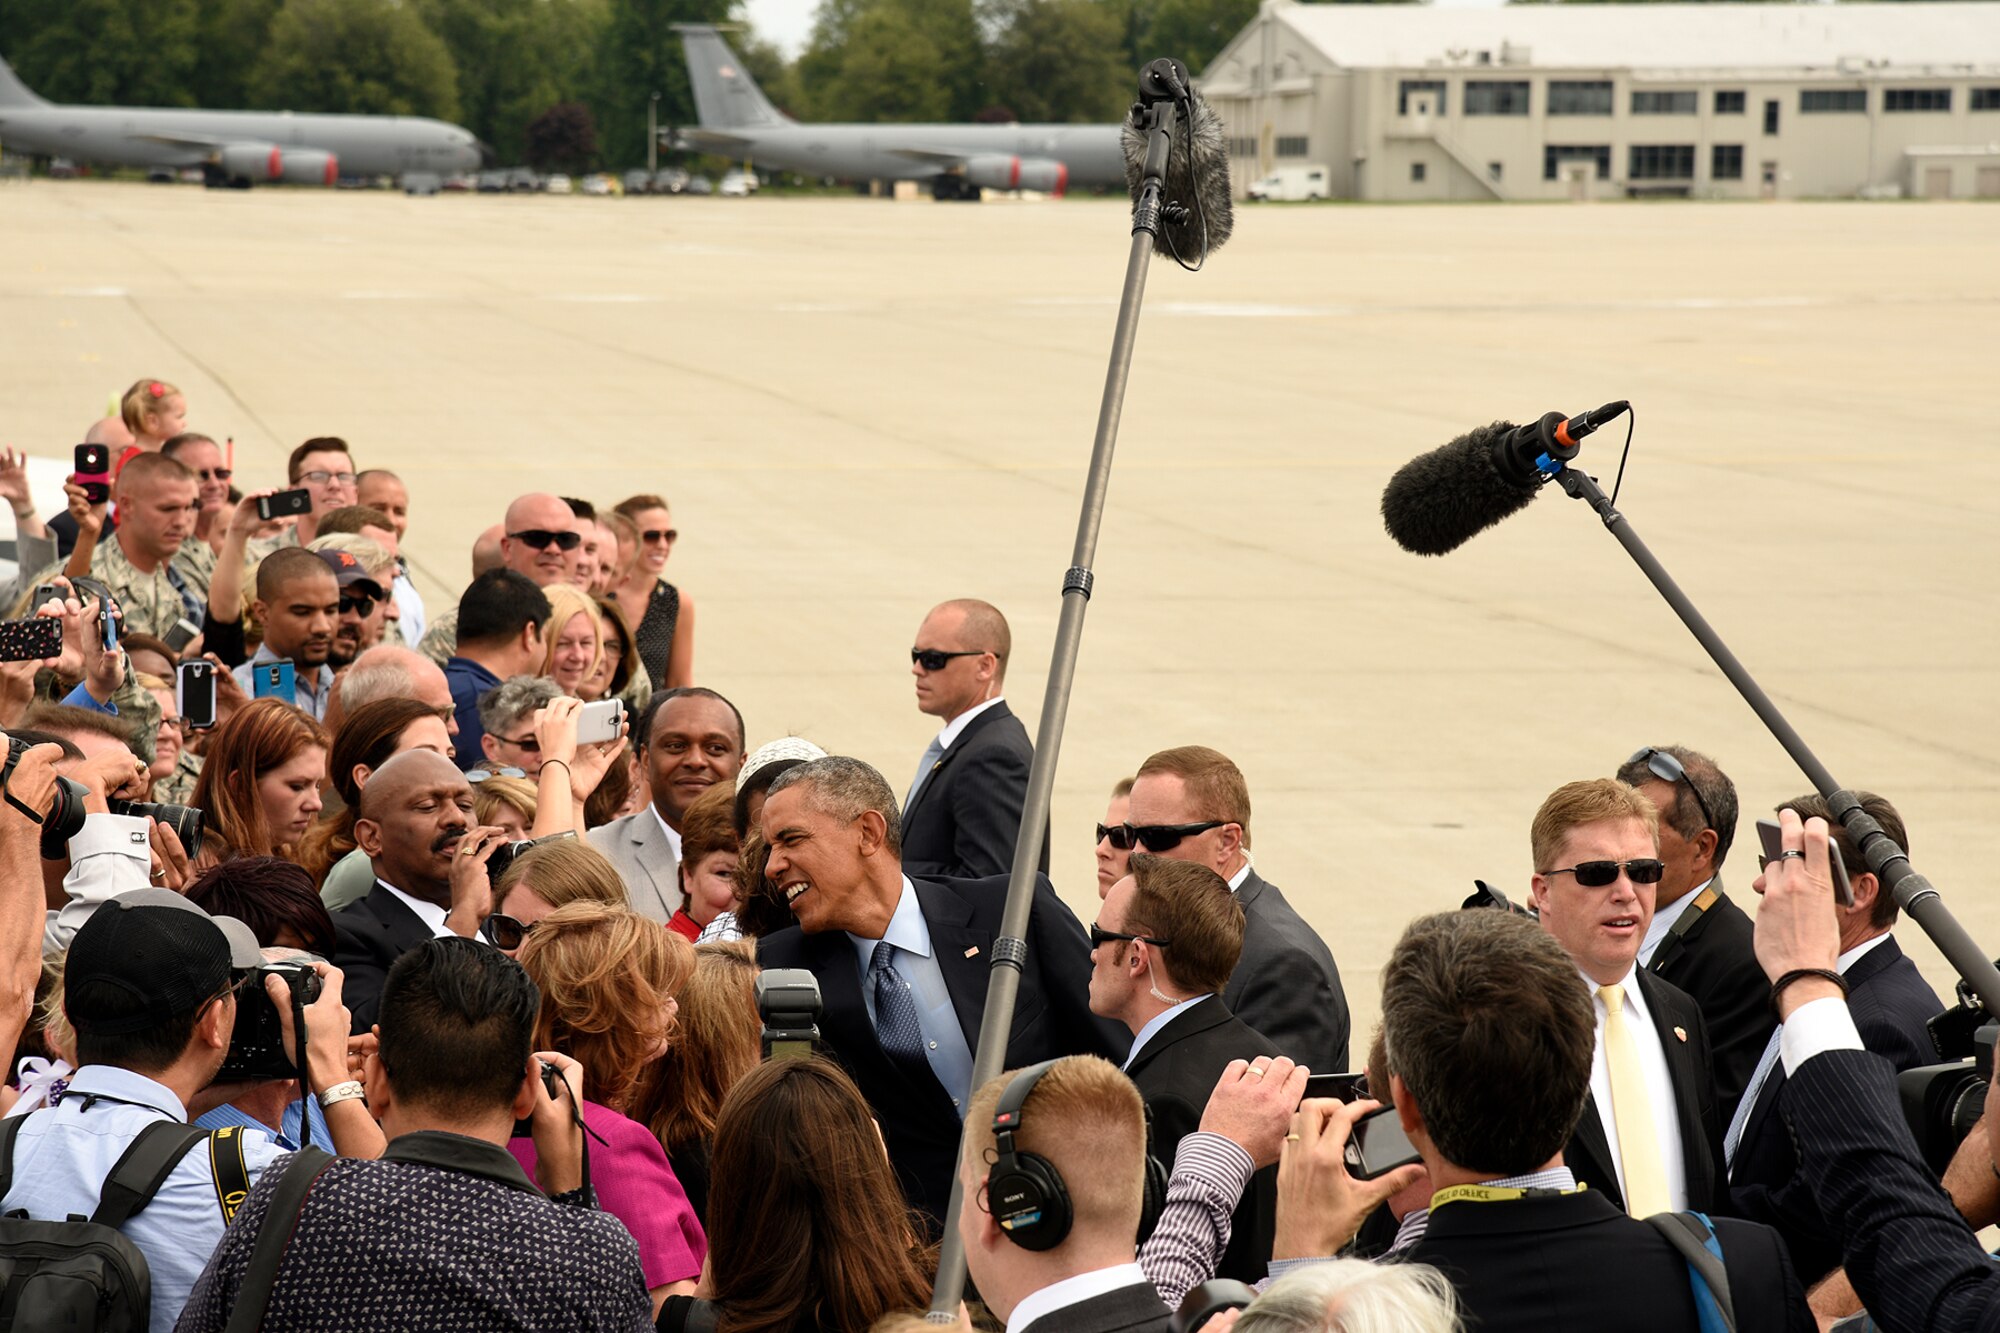 President Barack Obama shakes hands with Airmen and civilian guests during a brief stop at Selfridge Air National Guard Base, Mich., Sept. 9, 2015. The president stopped at the base during a trip to nearby Macomb Community College in Warren, Mich., to discuss federal higher education initiatives. (U.S. Air National Guard photo by Master Sgt. David Kujawa / Released)